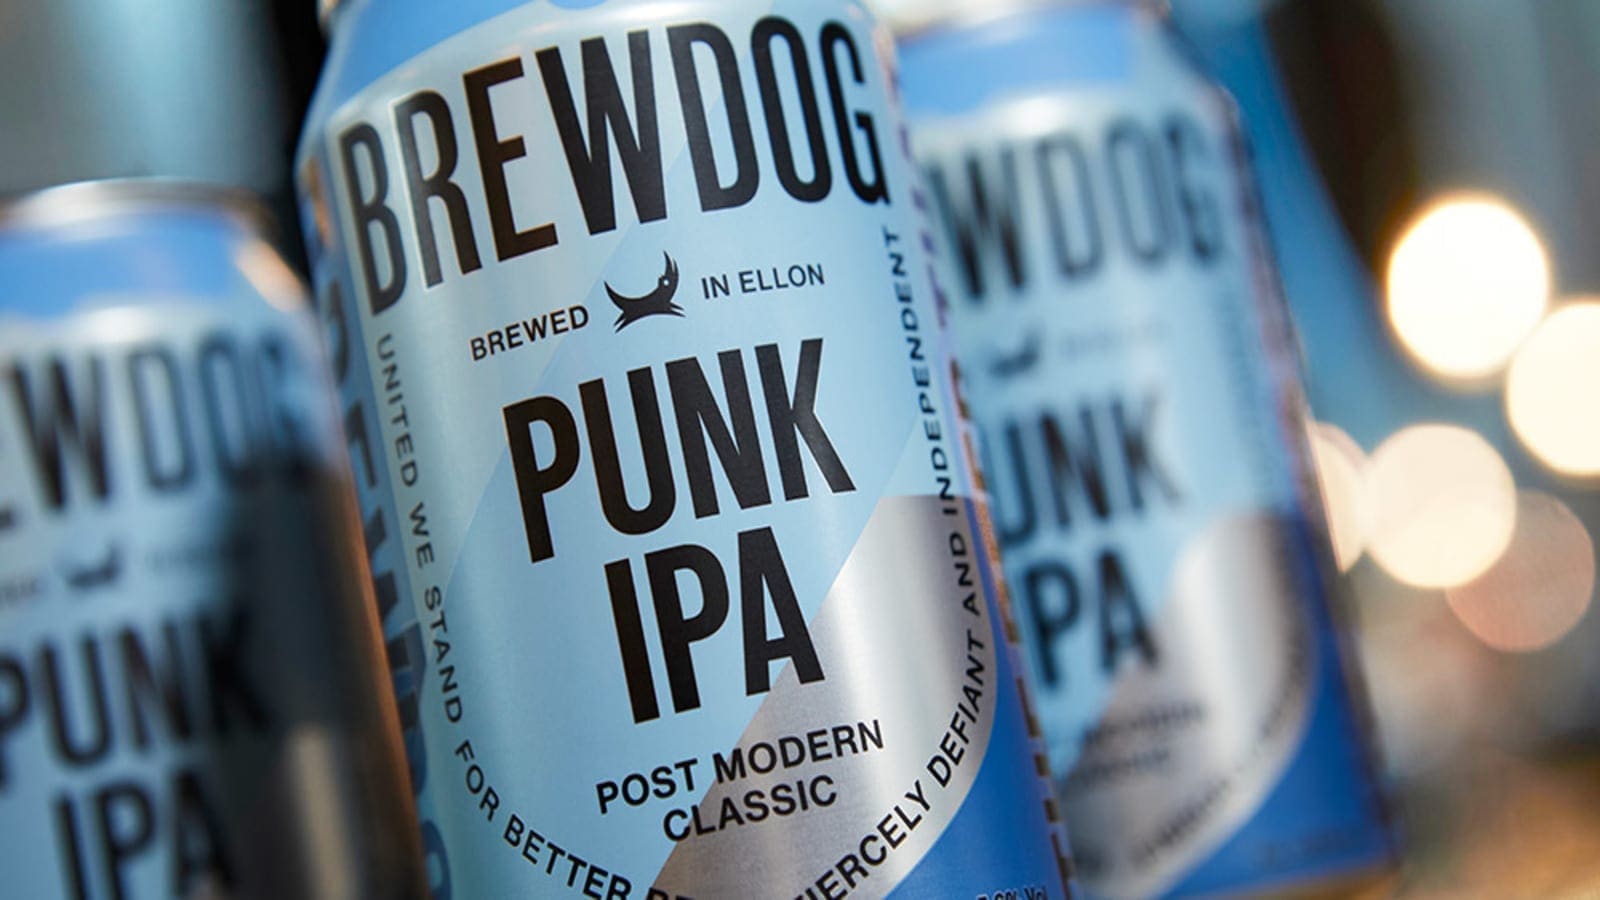 Scottish start-up BrewDog wants to become  world’s leading beer brand in the next 10 years